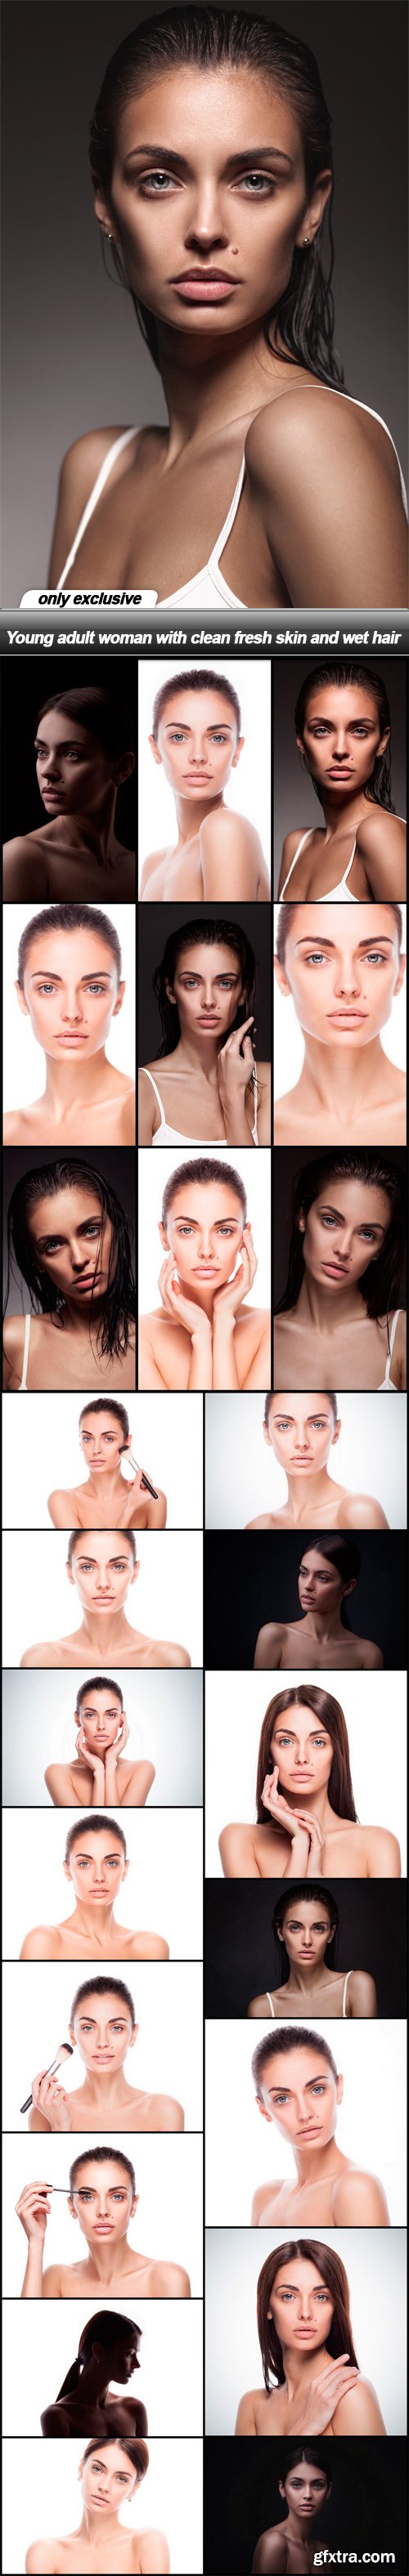 Young adult woman with clean fresh skin and wet hair - 24 UHQ JPEG